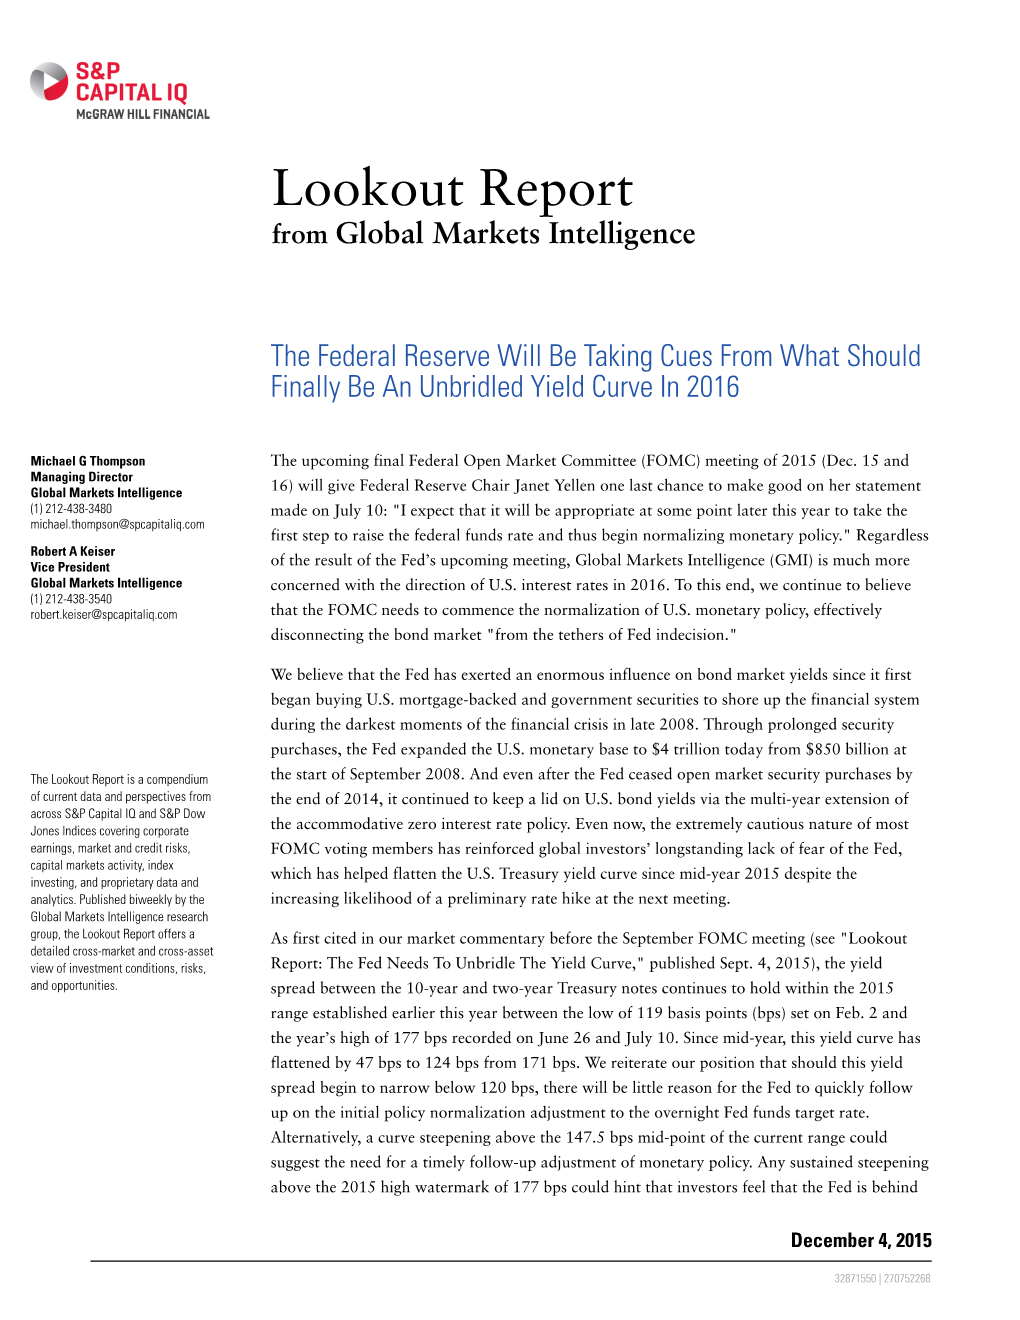 Lookout Report from Global Markets Intelligence